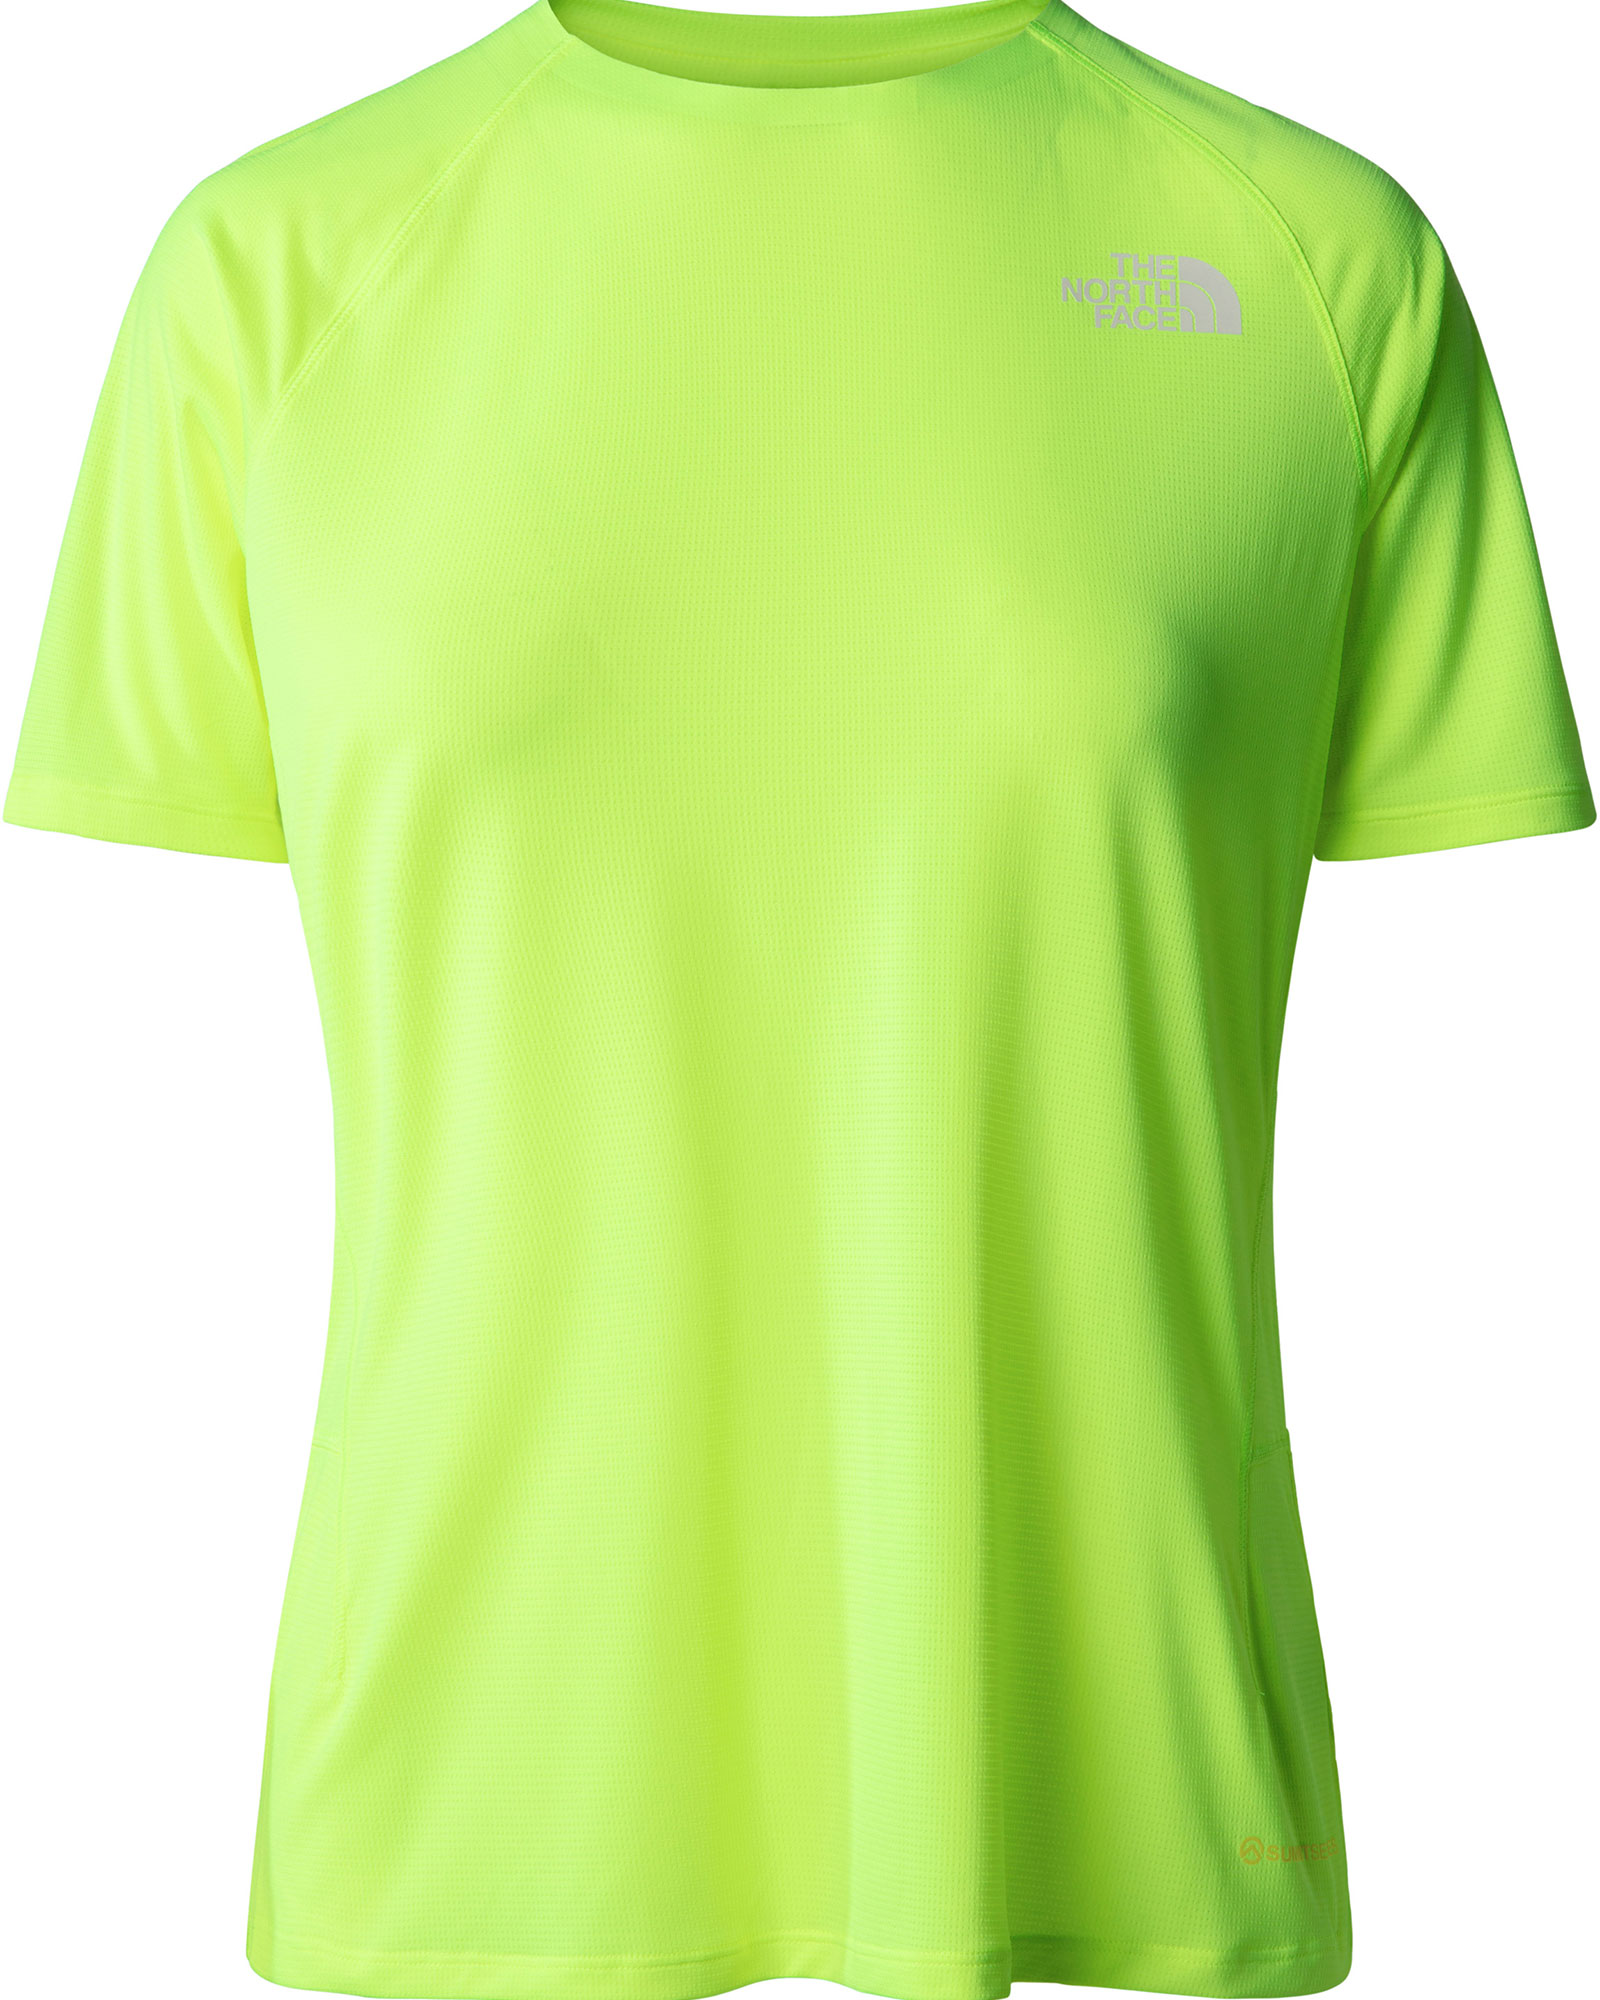 The North Face Women's Summit High Trail S/S Tee 0